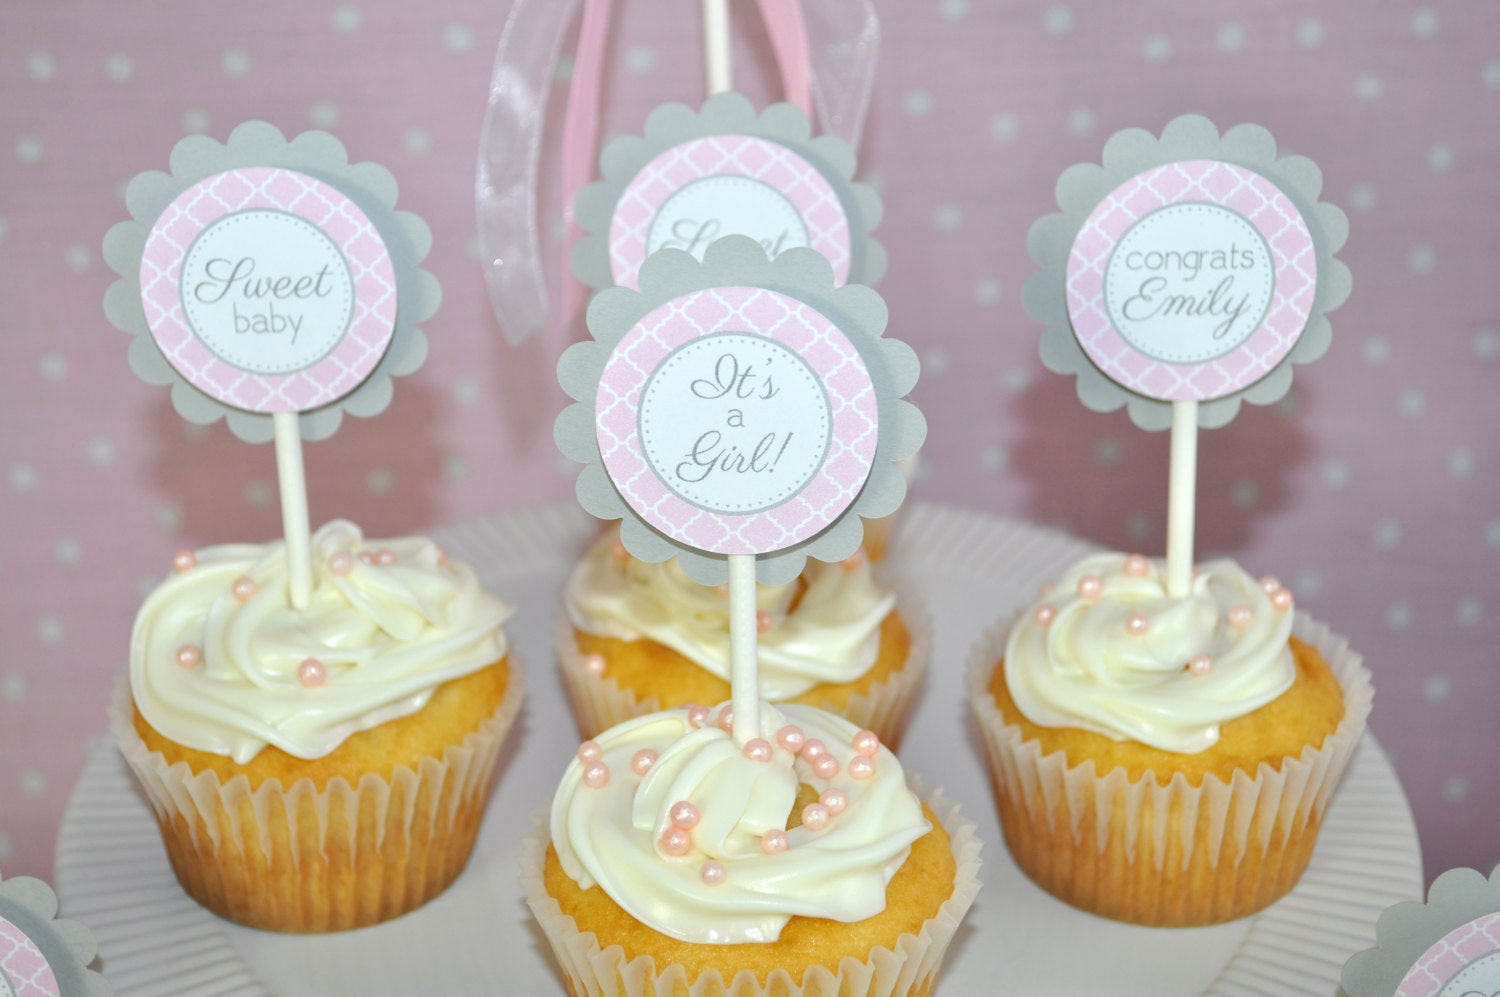 Pink Baby Shower Cupcakes
 Girls Baby Shower Cupcake Toppers Pink and Gray Girl Baby